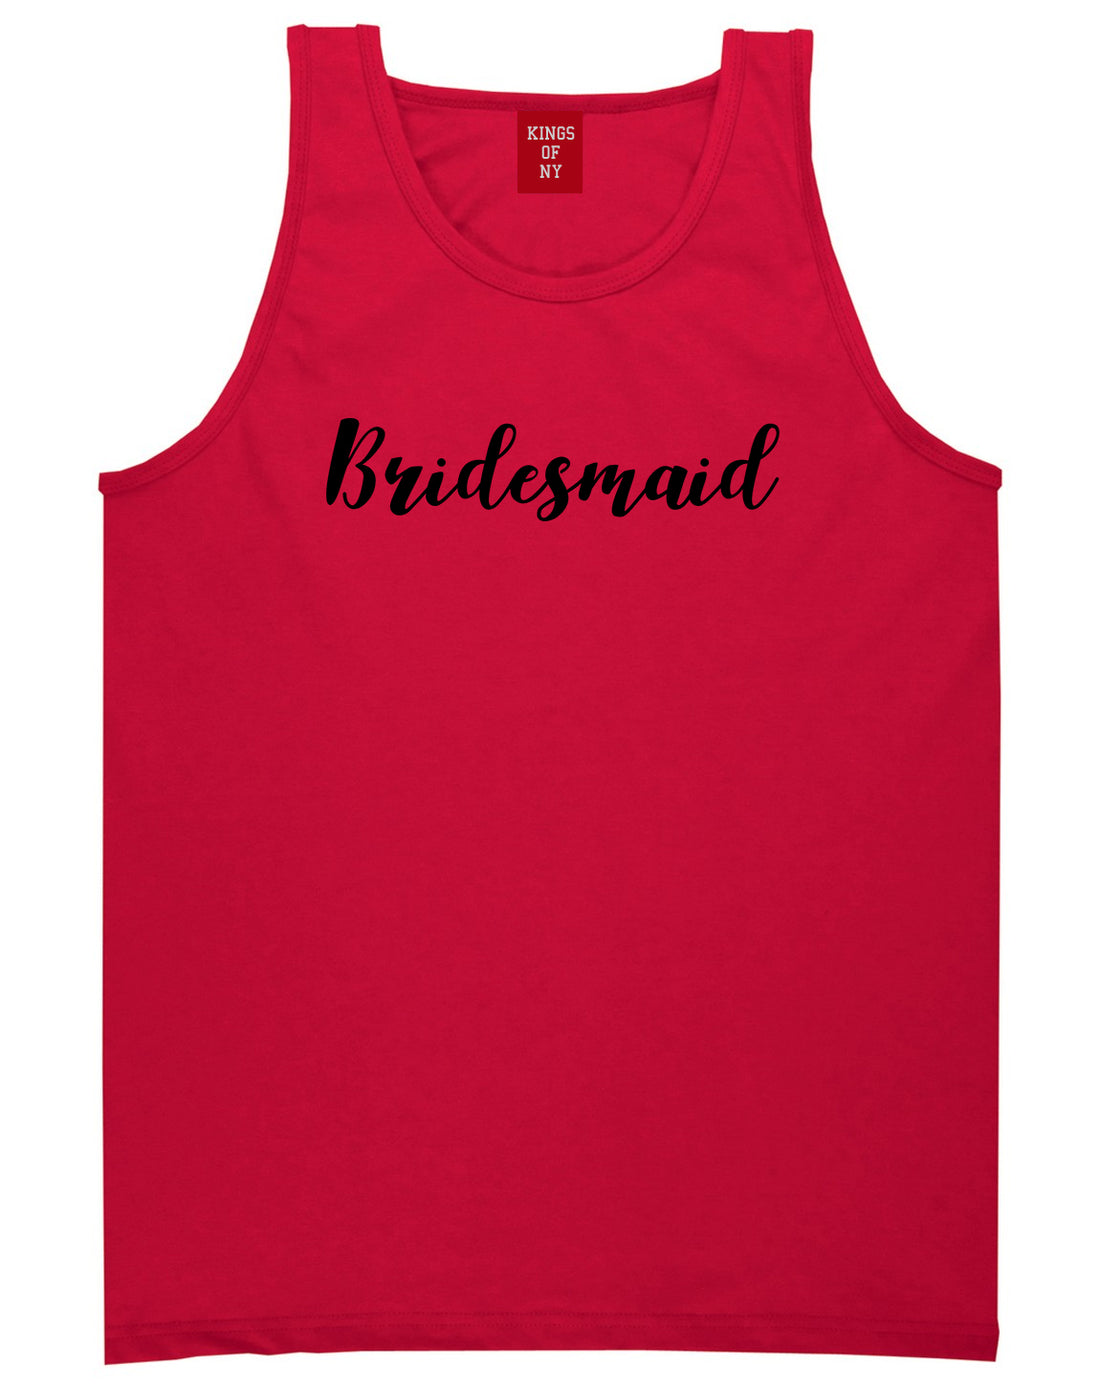 Bridesmaid Bachlorette Party Red Tank Top Shirt by Kings Of NY